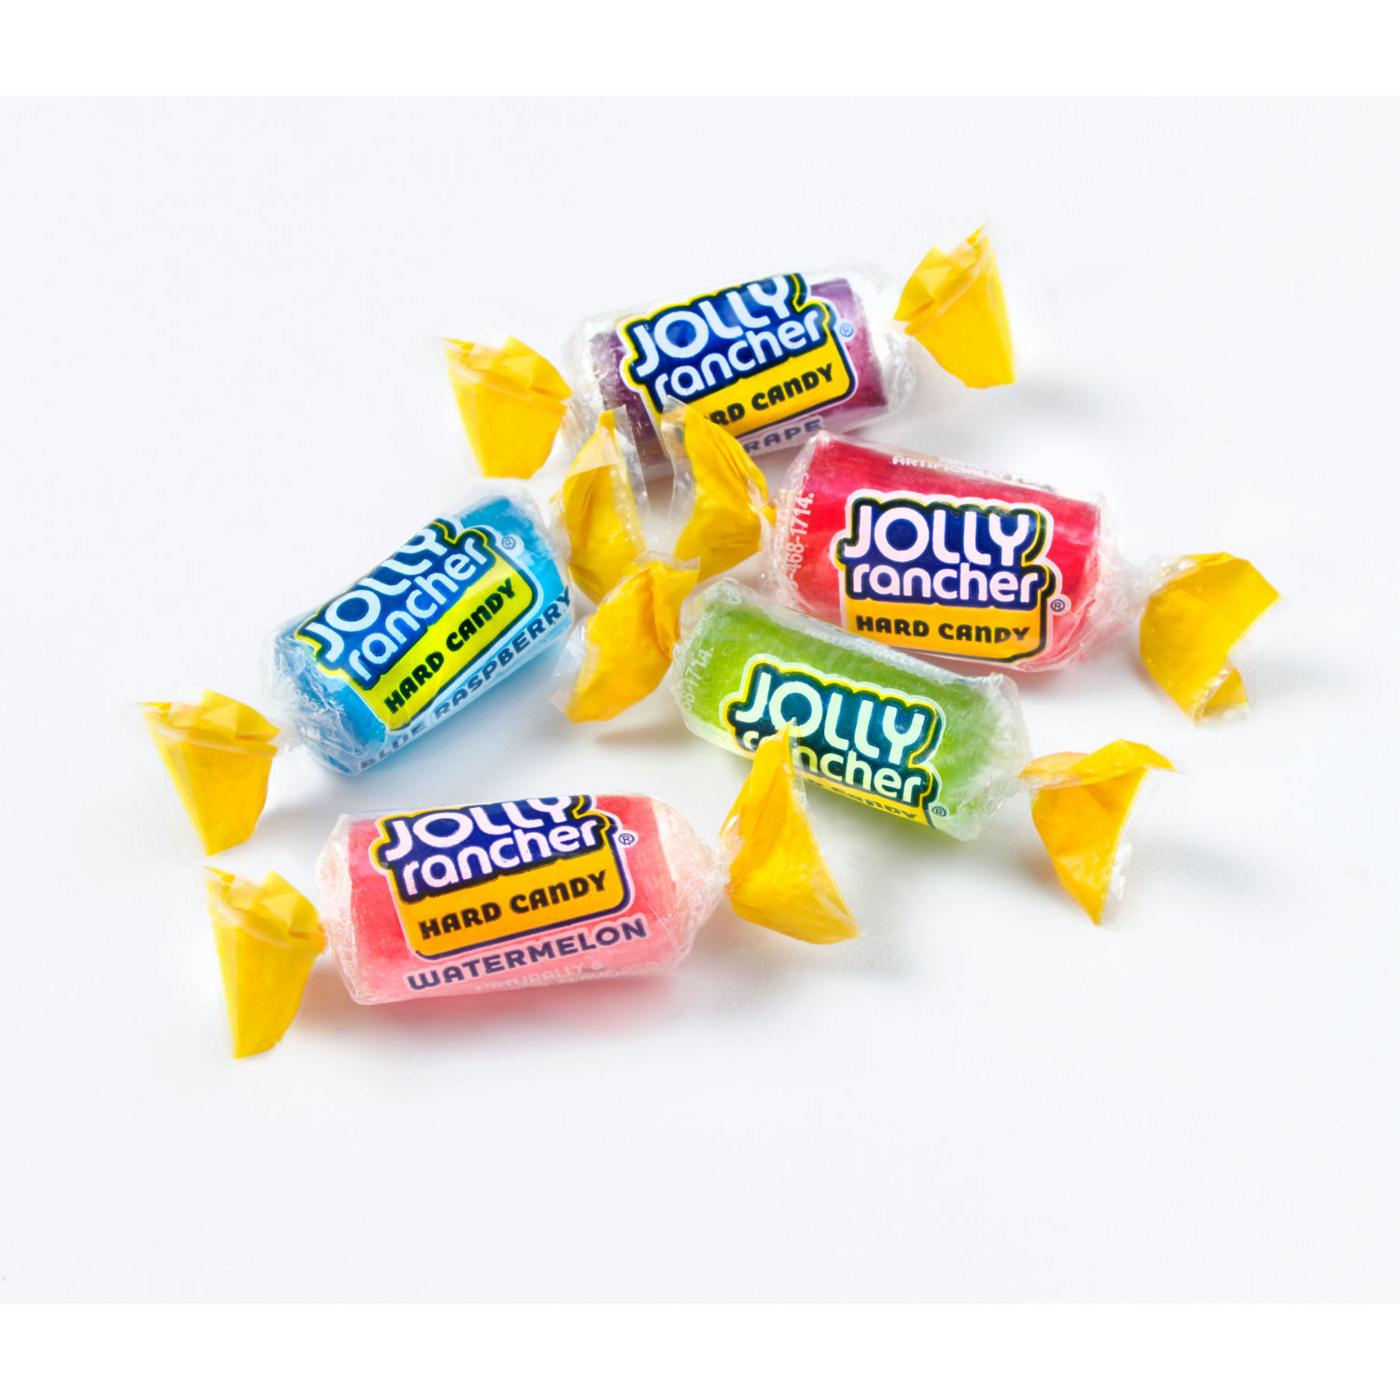 Jolly Rancher Original Fruit Flavored Hard Candy; image 7 of 7